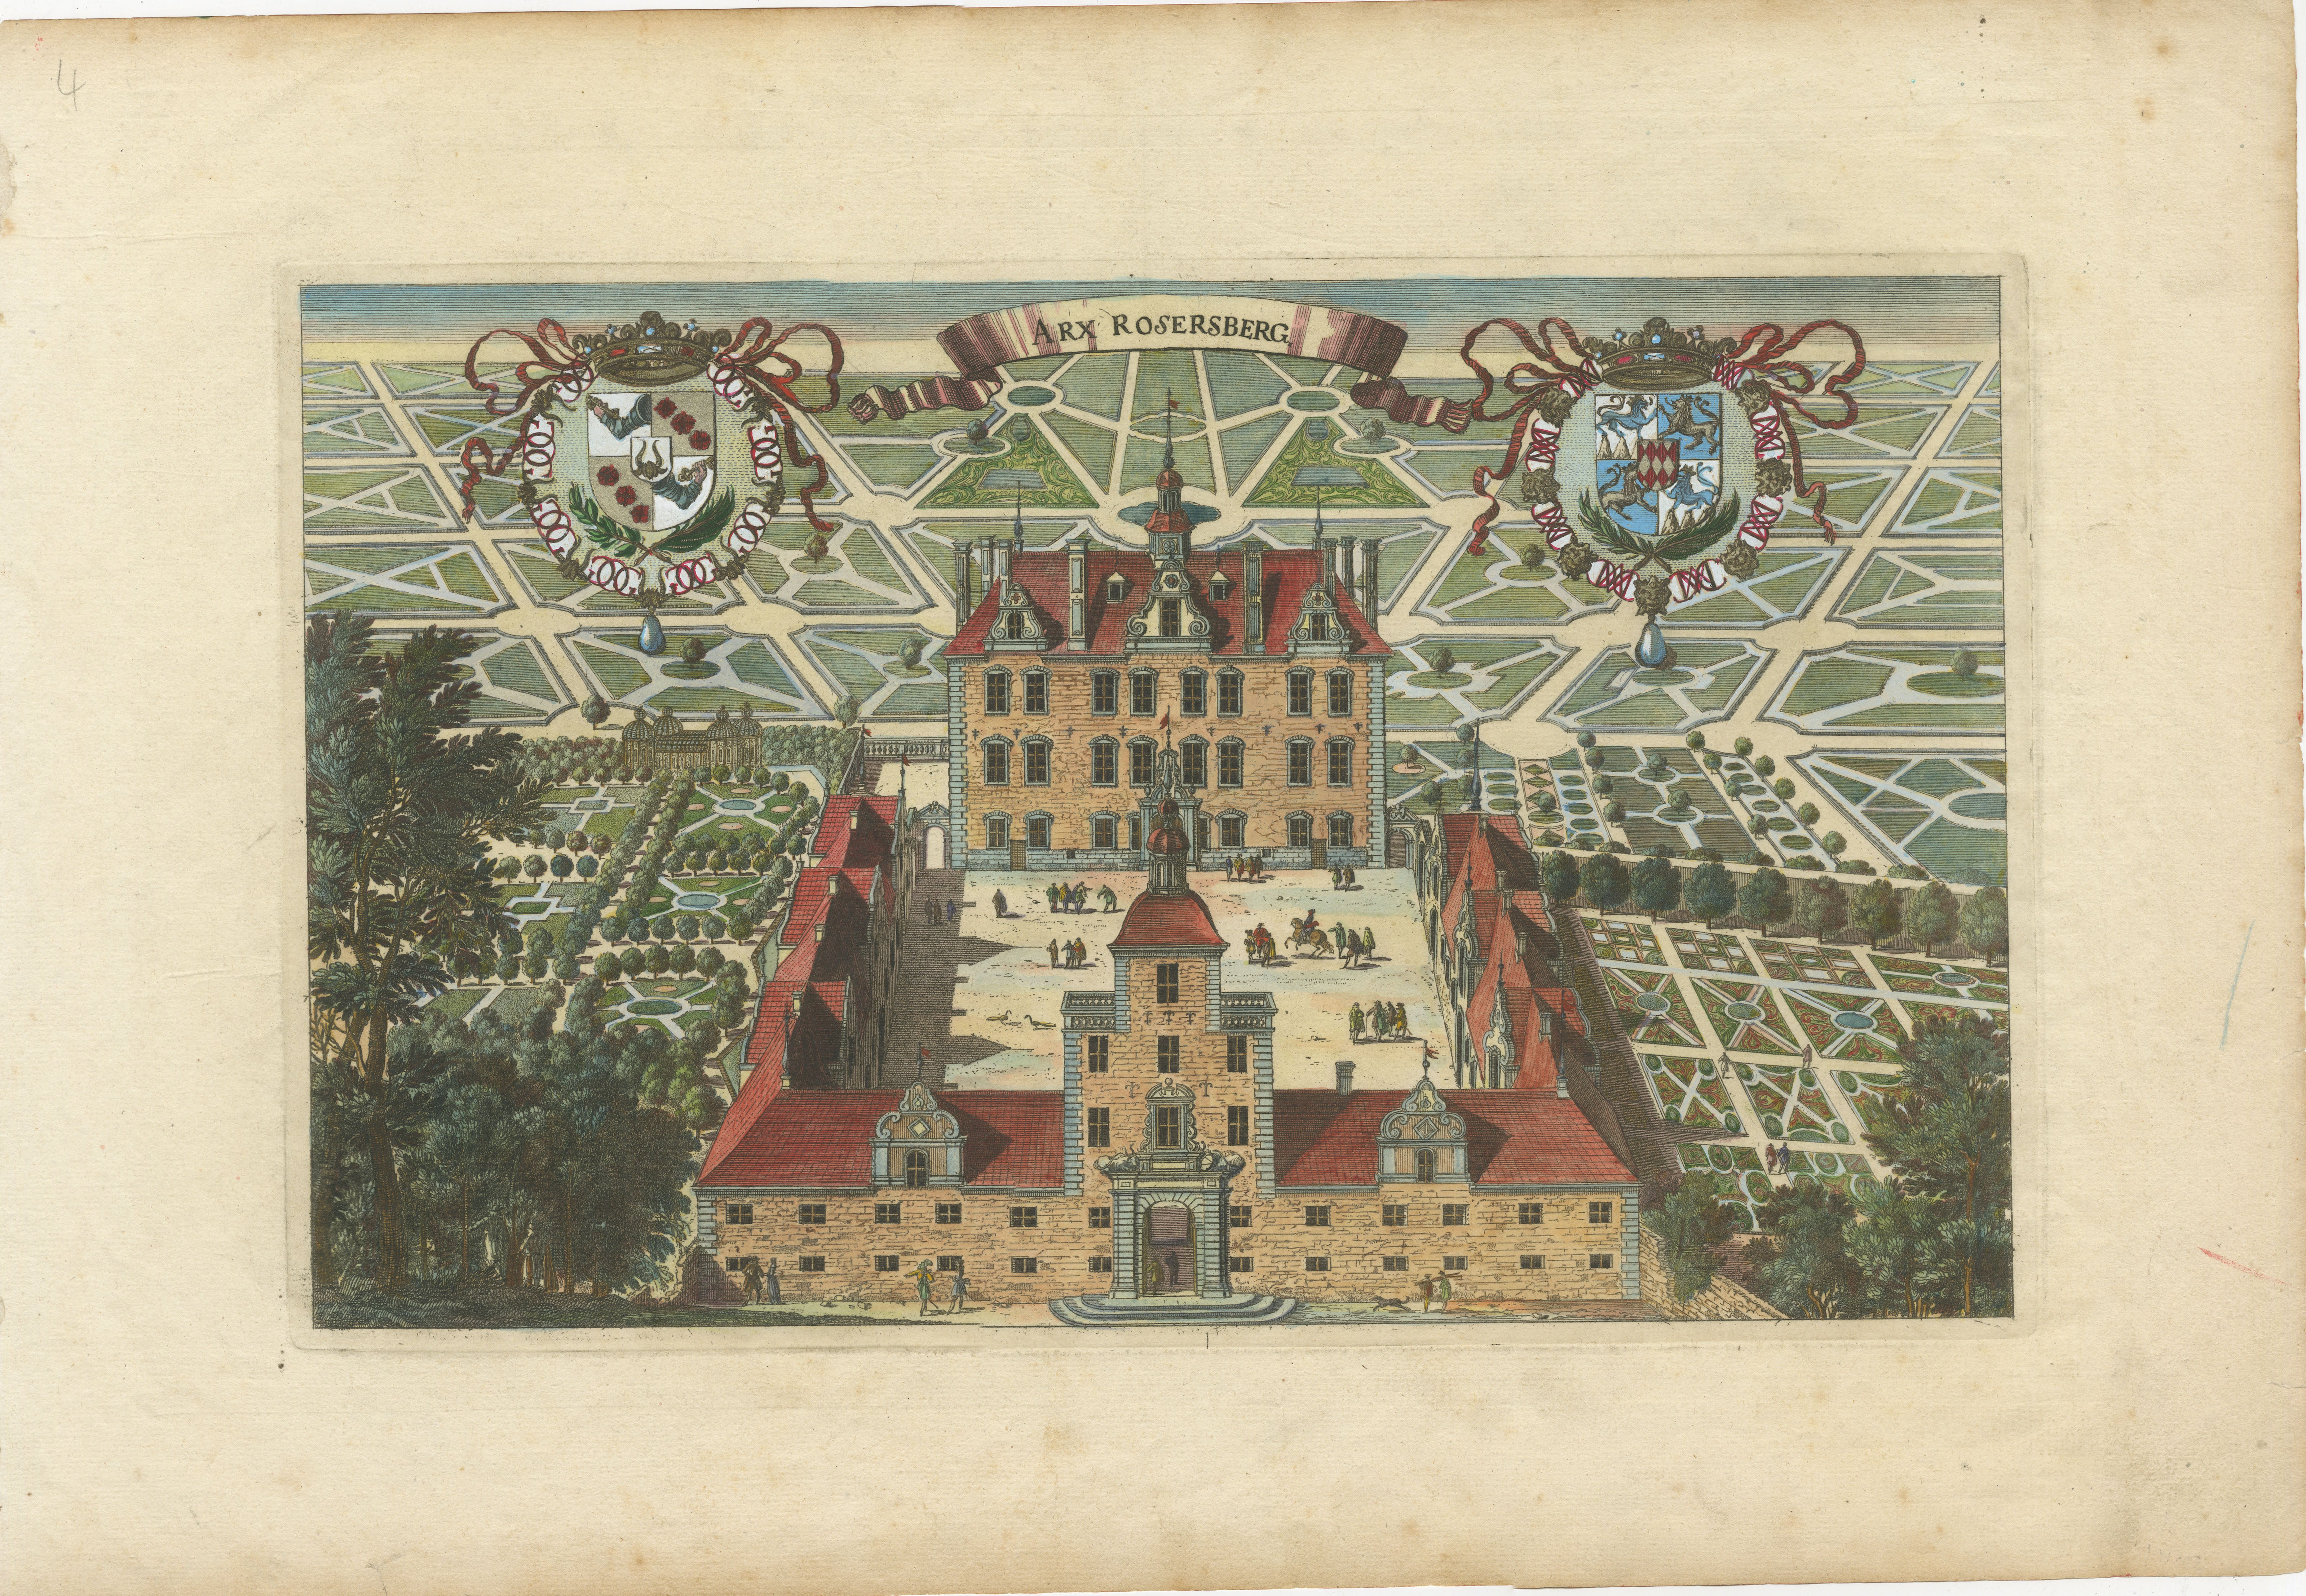 The engraving is a historical depiction of Rosersberg Castle, a baroque estate in Sweden. These engravings, often created in the 1690s as part of Erik Dahlberg's collection, typically showcase a bird's-eye view of the castle and its elaborate